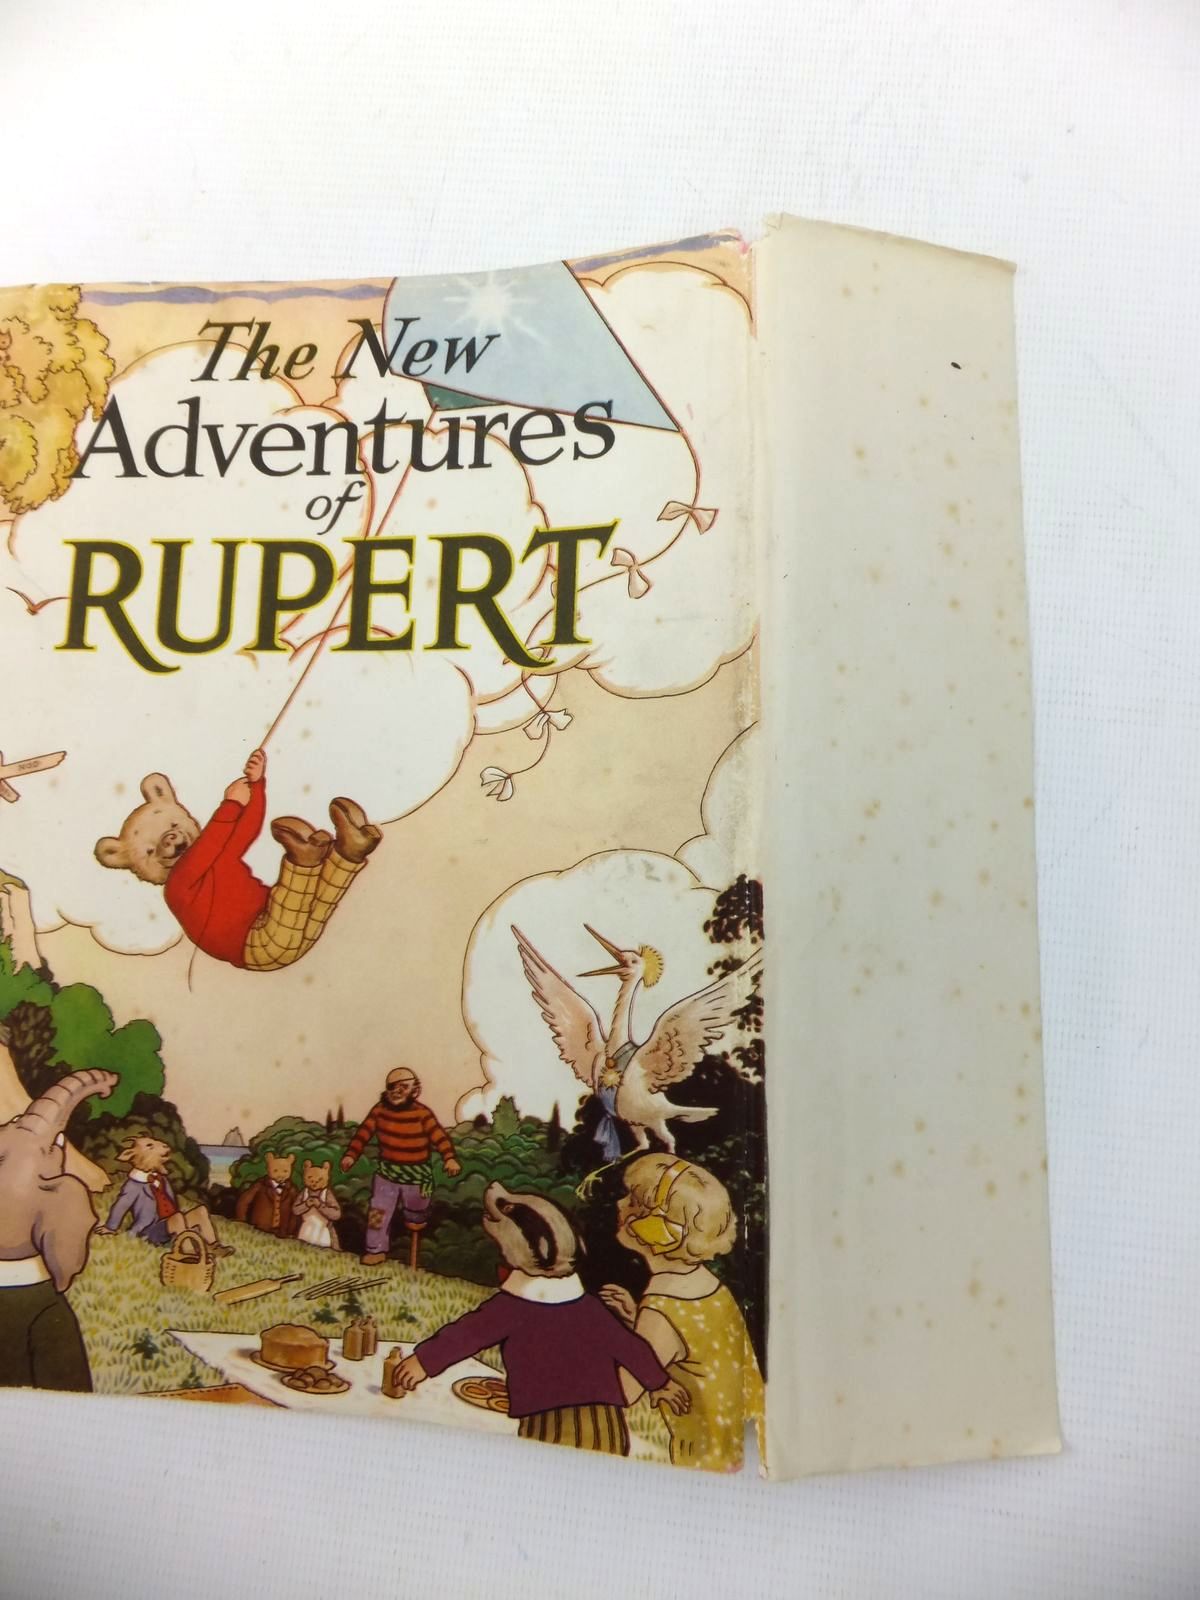 Photo of RUPERT ANNUAL 1936 - THE NEW ADVENTURES OF RUPERT written by Bestall, Alfred illustrated by Bestall, Alfred published by Daily Express (STOCK CODE: 2118169)  for sale by Stella & Rose's Books